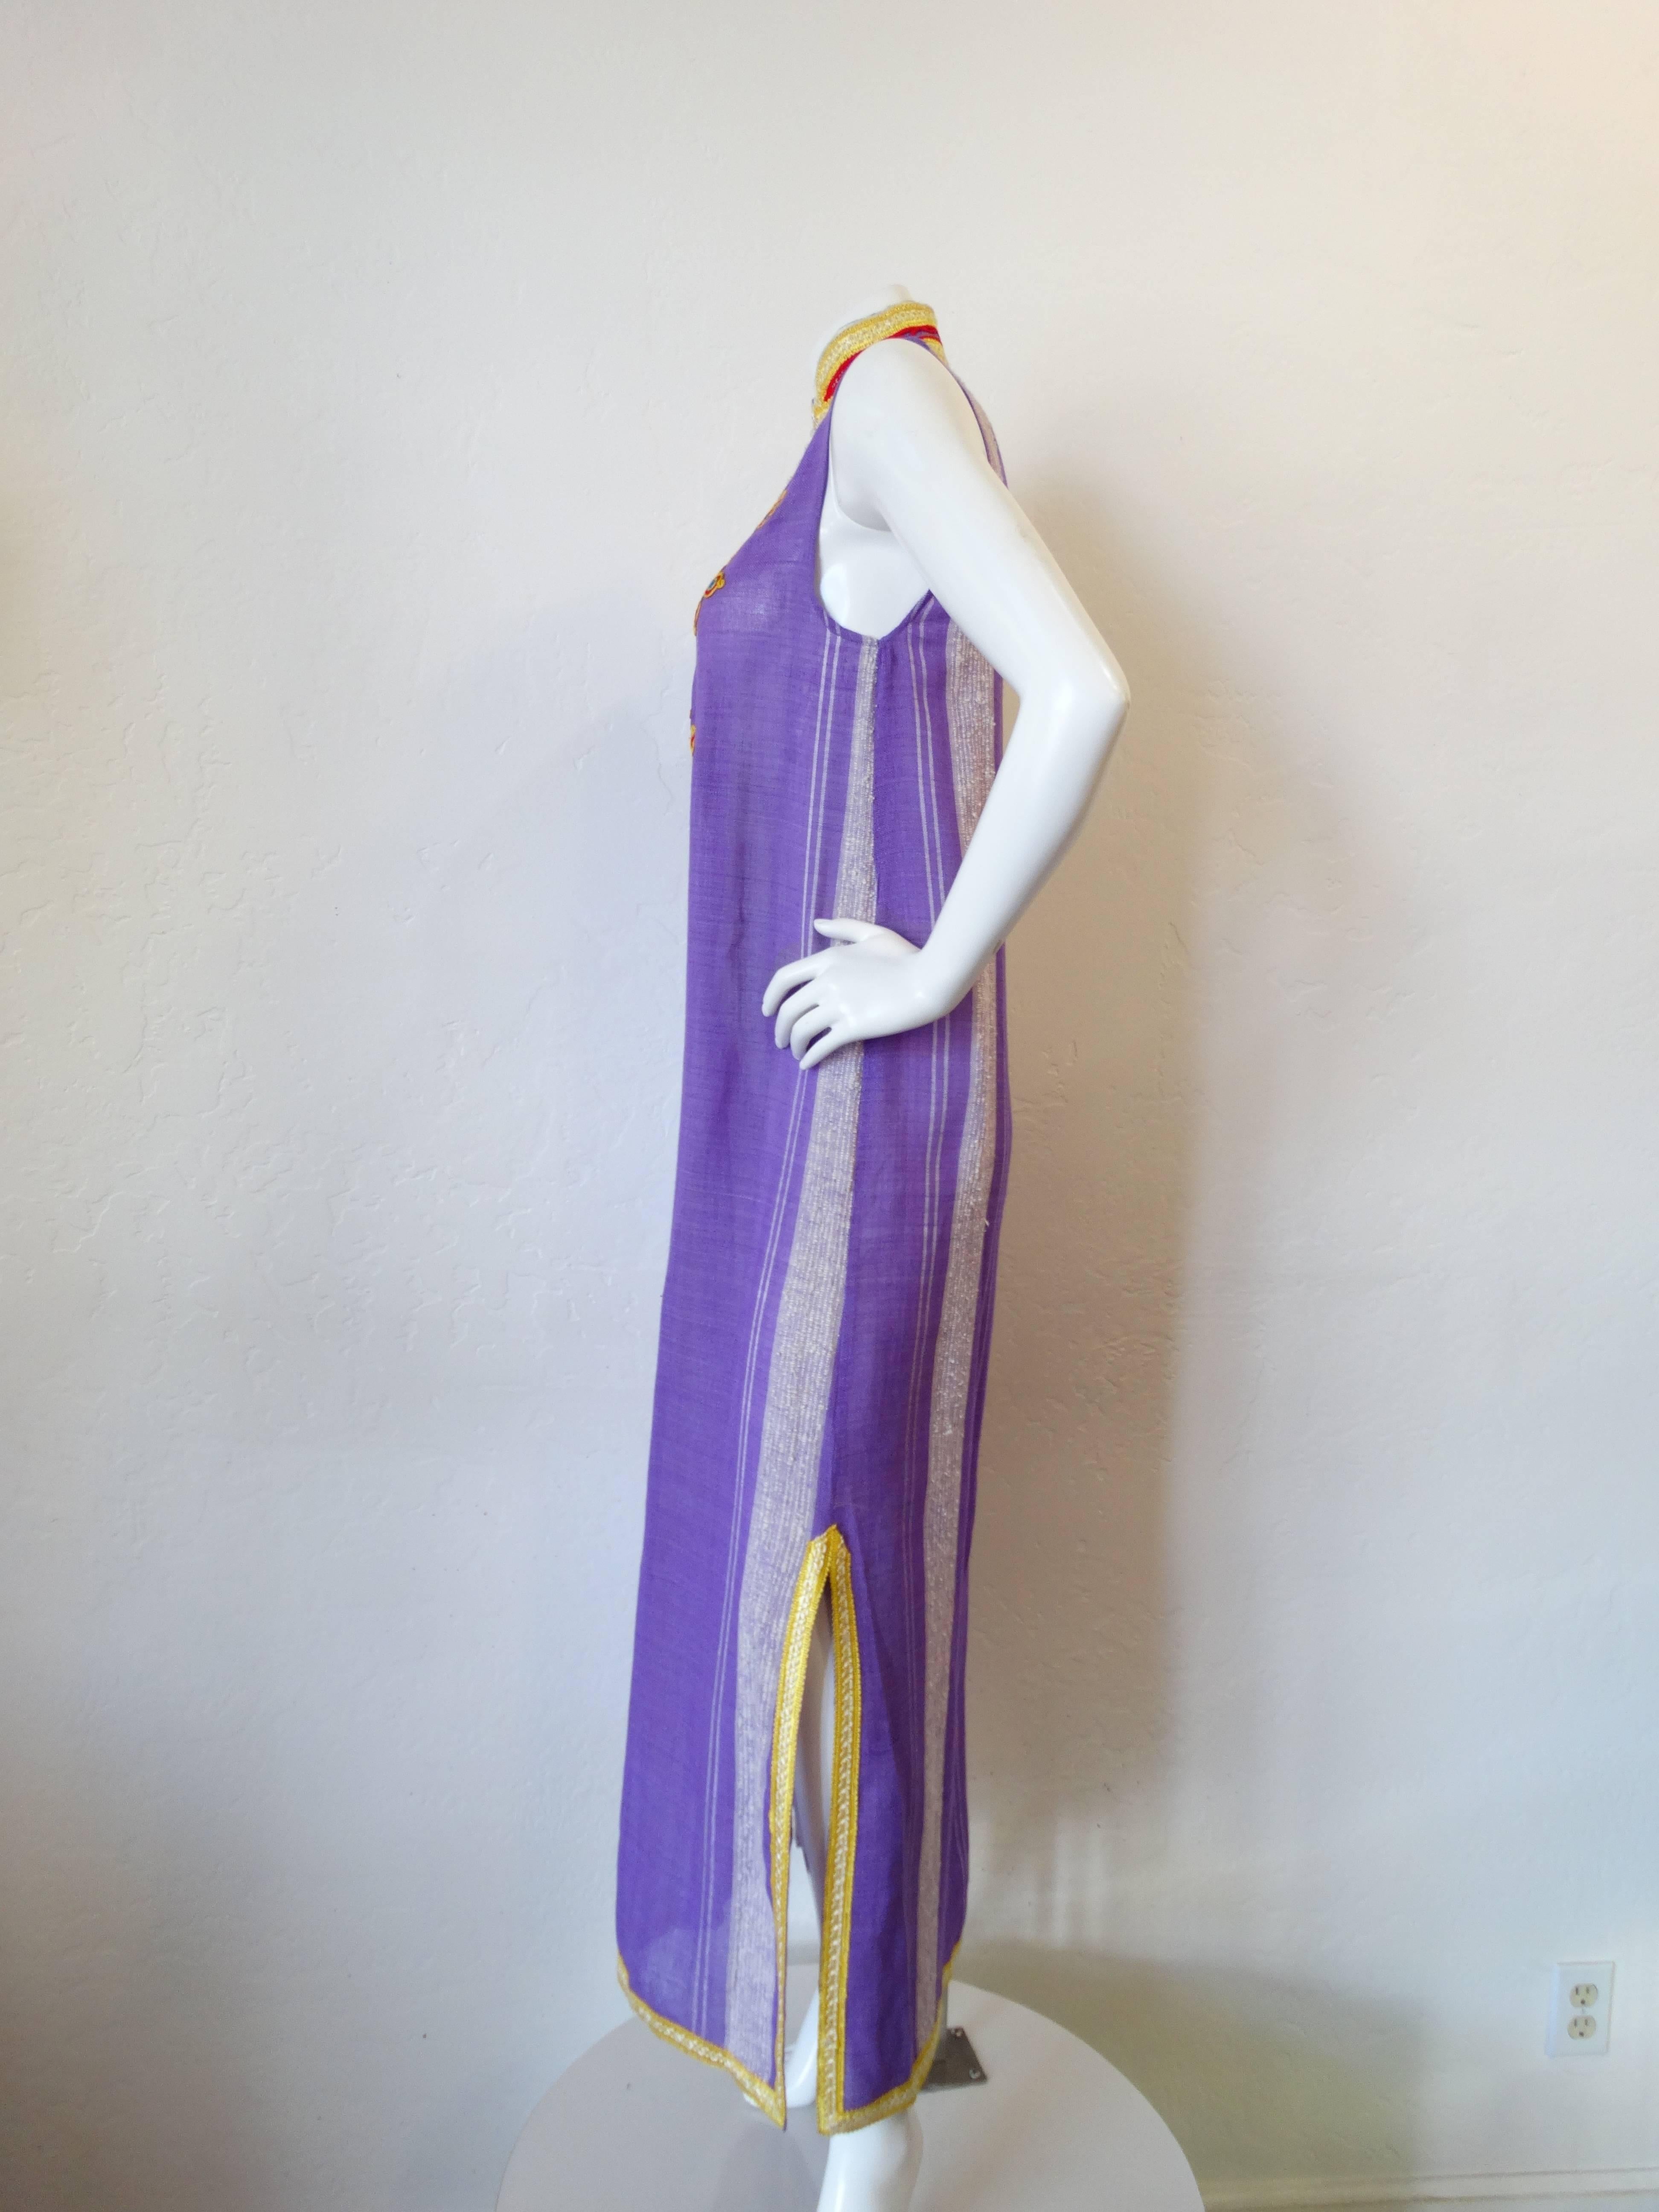 Incredible 1970s sleeveless dress from designer Glenn Mark of Boston Breathable sheer woven cotton in a brilliant purple color. Accented with primary colored embroidery along the neck and bodice. Buttons up the bust. Marked a size Small. 